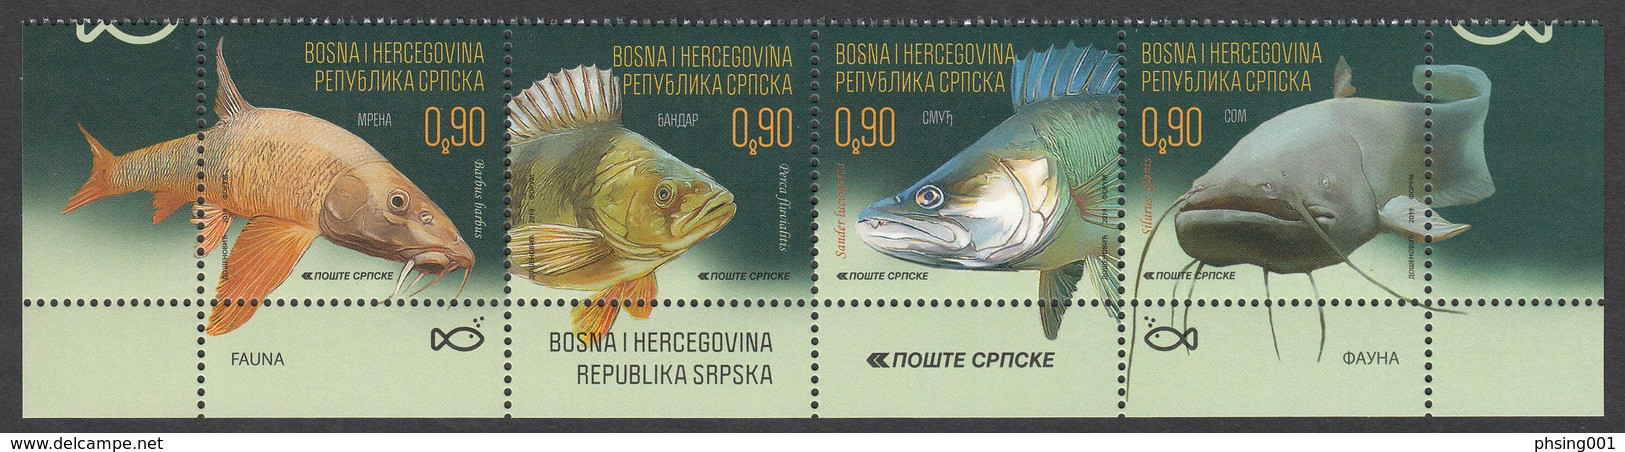 Bosnia Serbia 2019 Fauna Fishes Of Sava River Perch Catfish Barbell Bandar Fische Poissons, Set In Strip MNH - Poissons